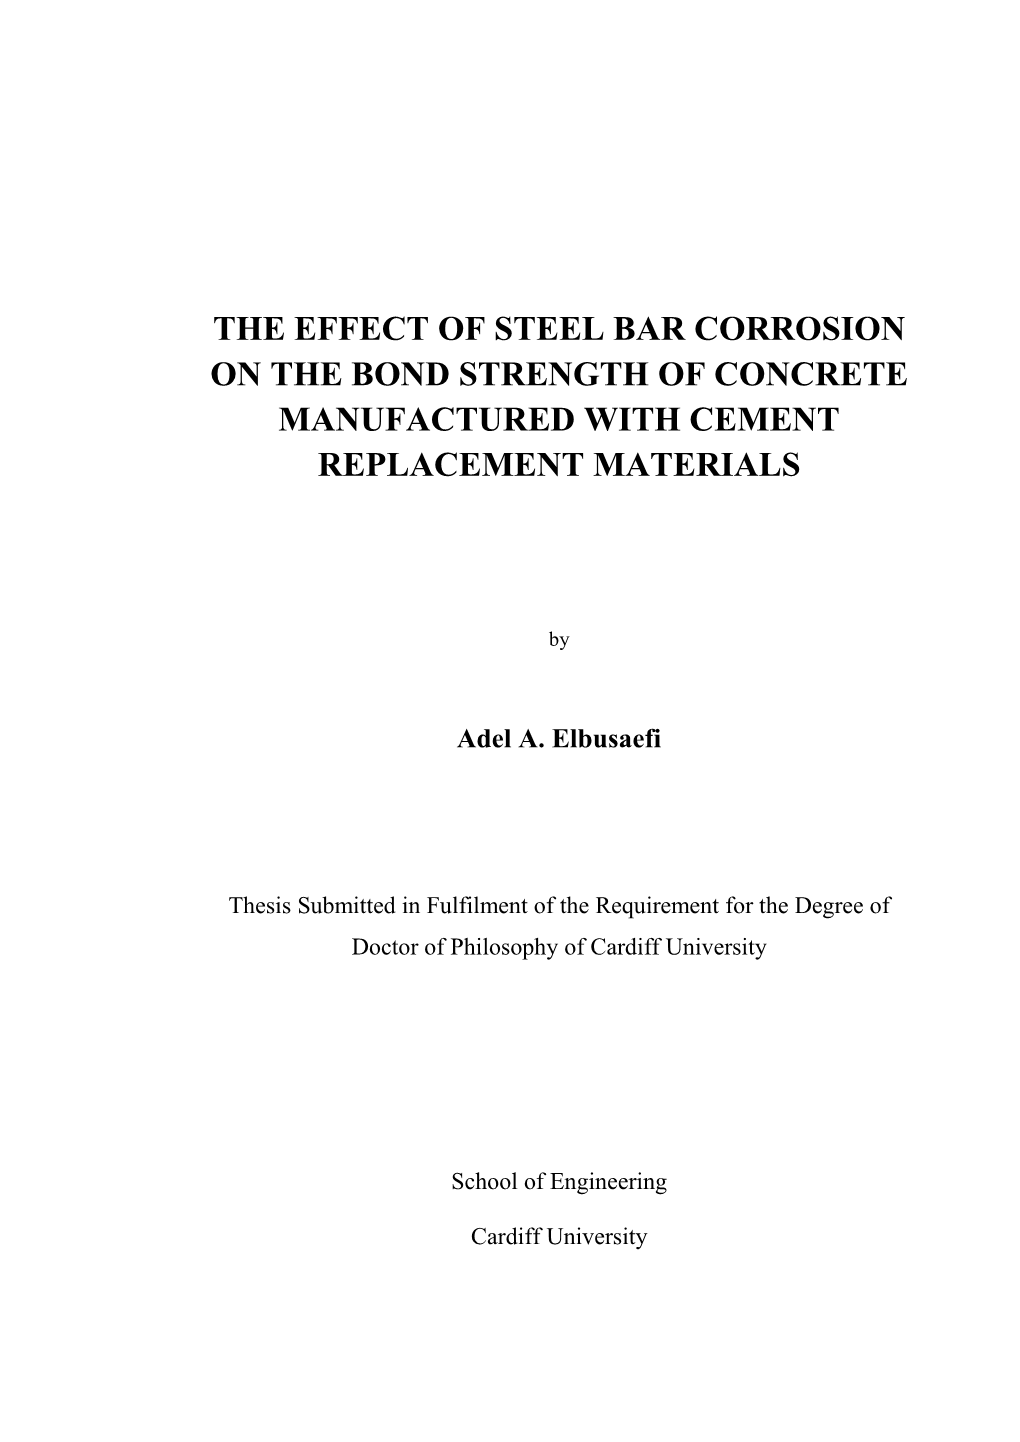 The Effect of Steel Bar Corrosion on the Bond Strength of Concrete Manufactured with Cement Replacement Materials